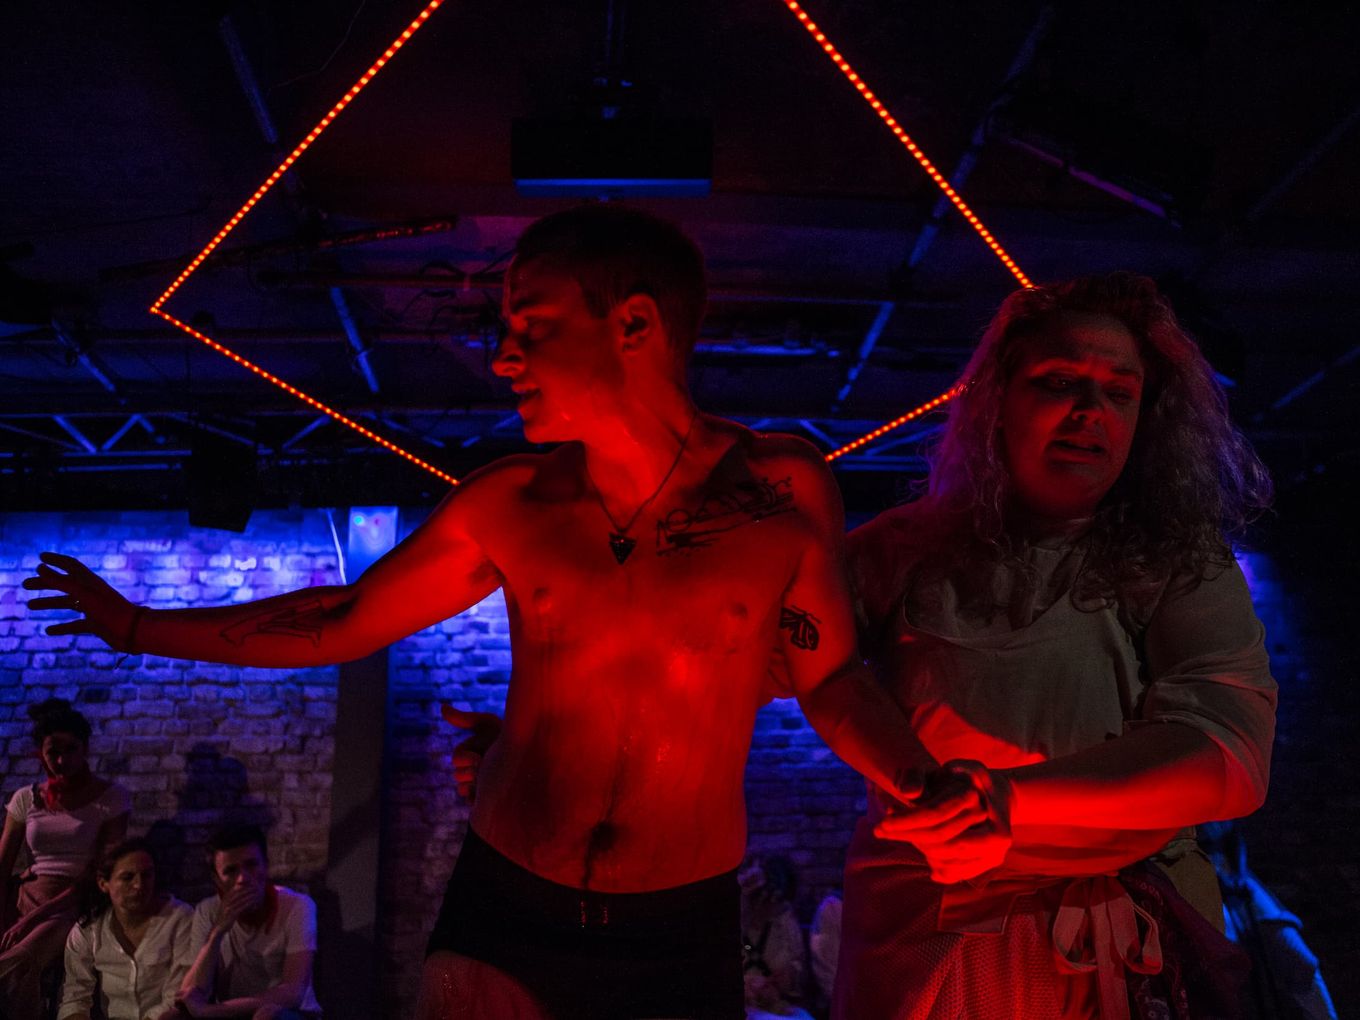 Under intense red light, a nearly naked man, dripping wet, is led away by a woman with long hair.